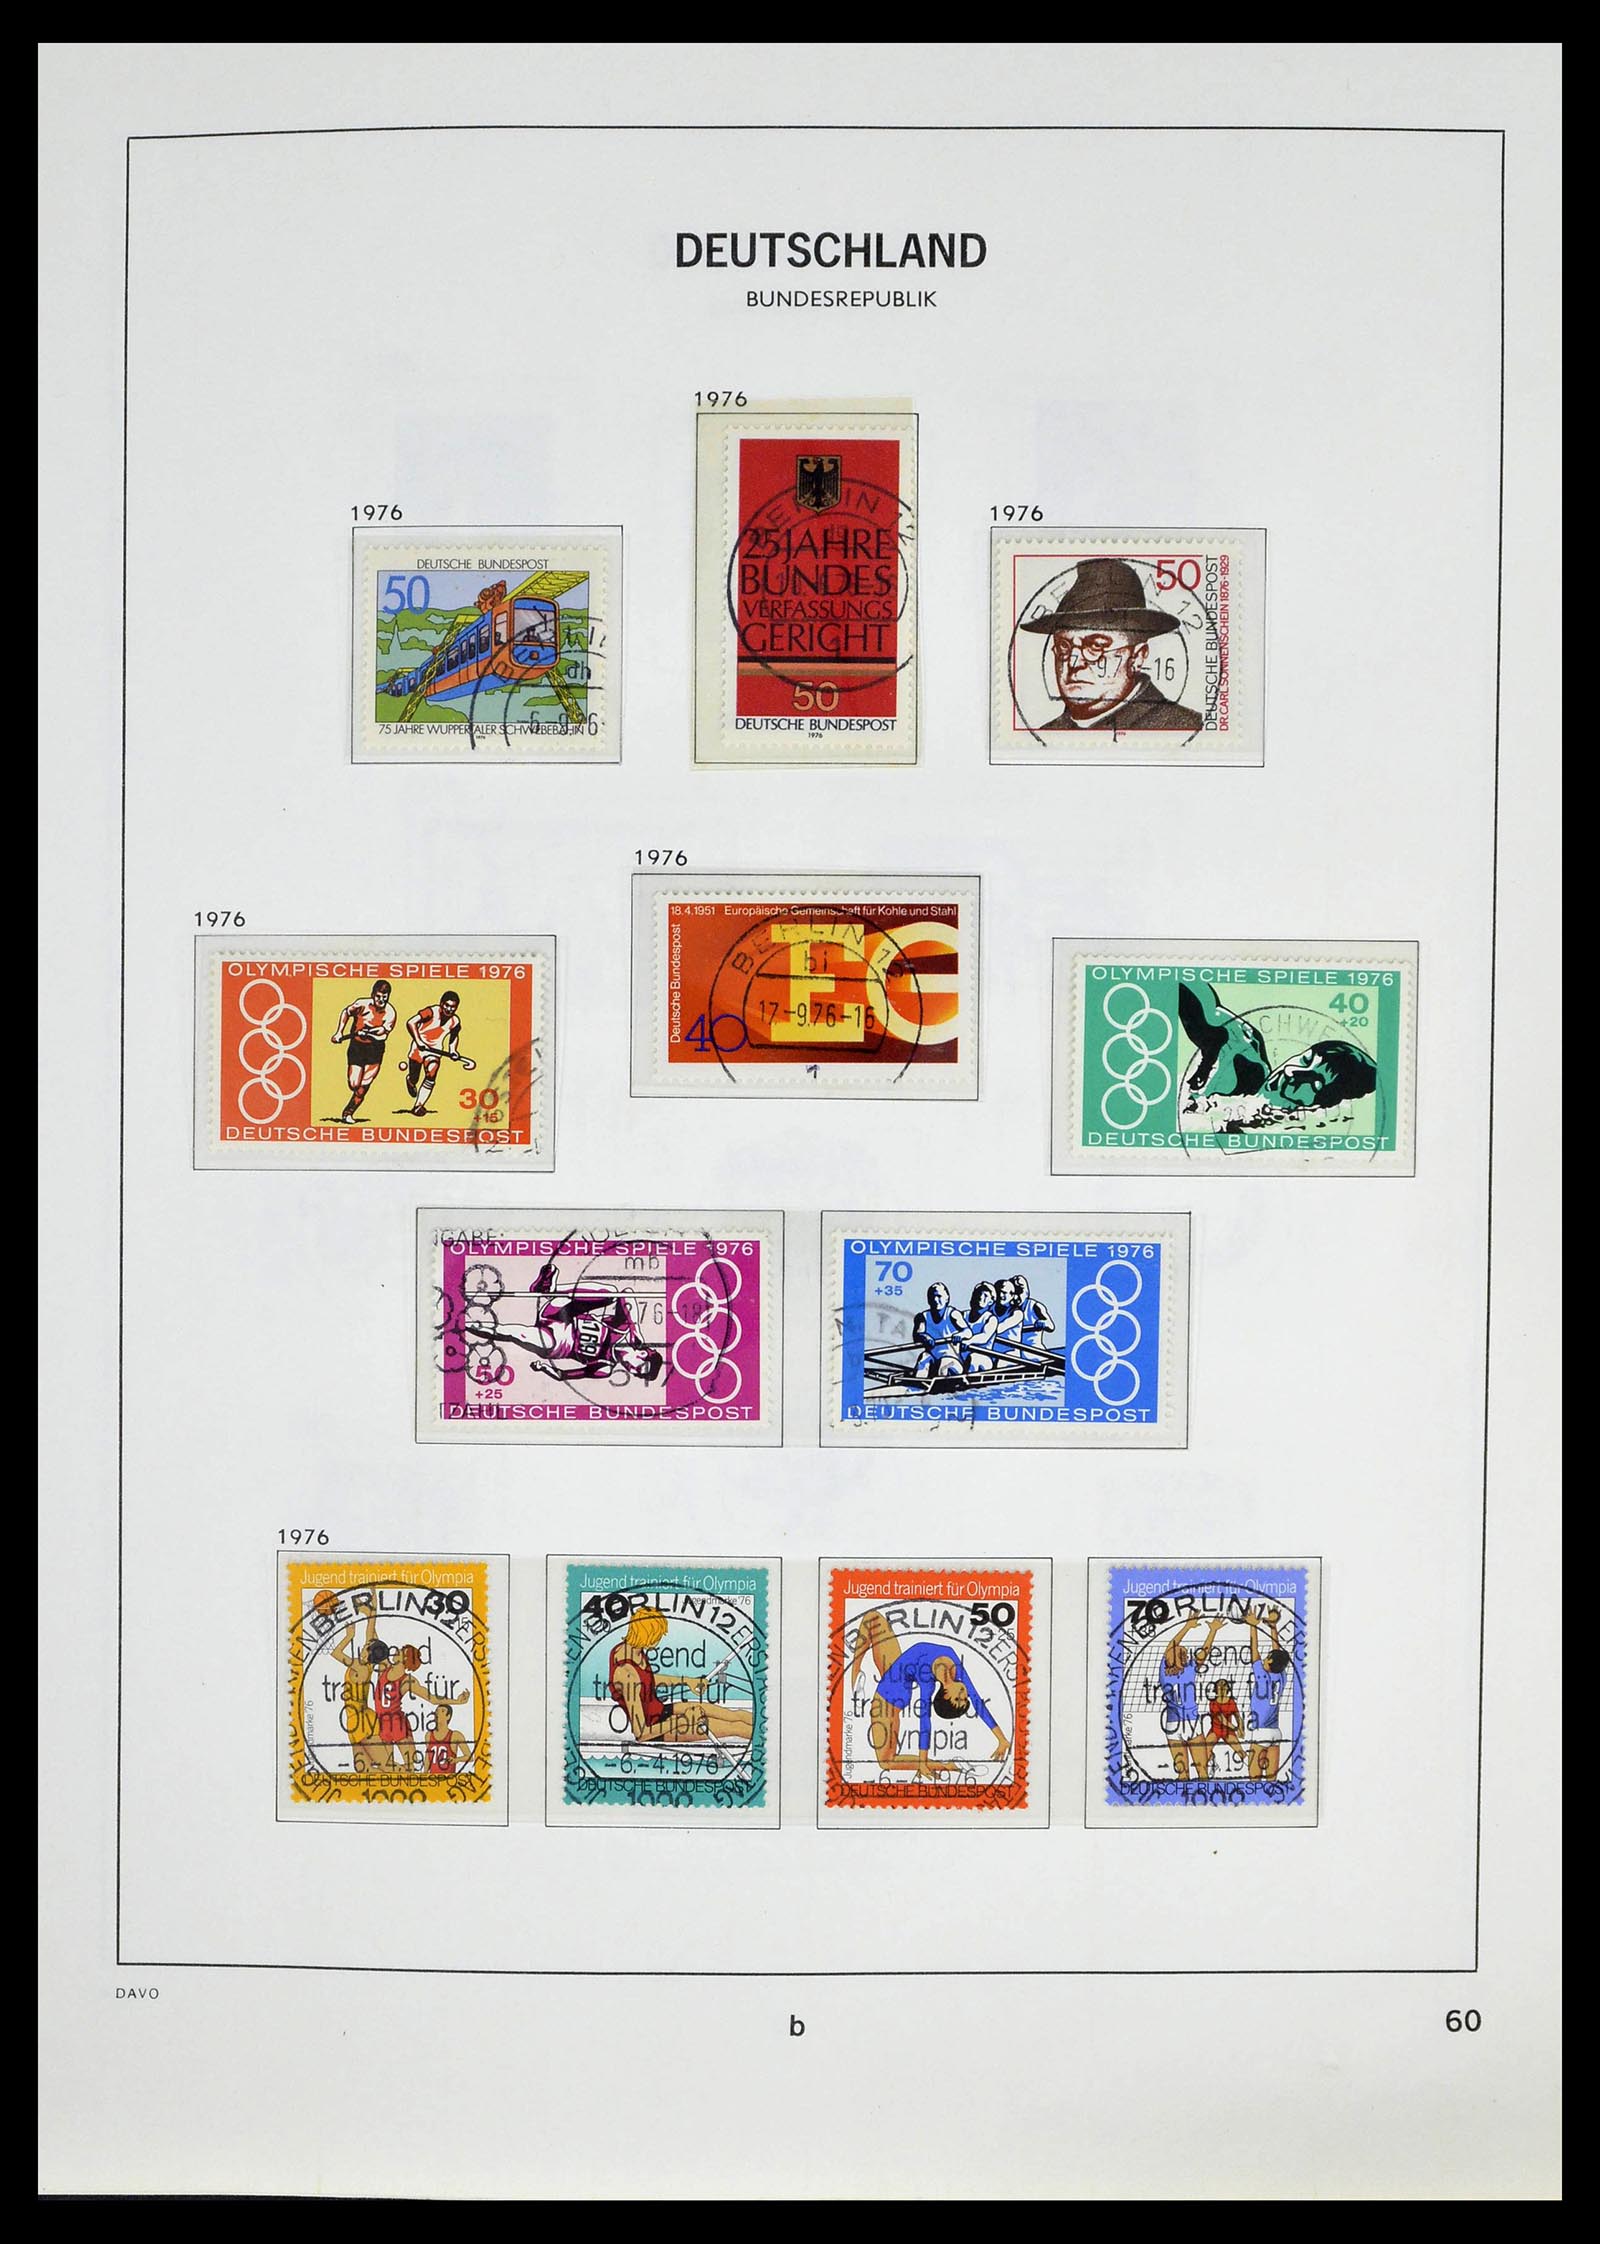 39326 0061 - Stamp collection 39326 Bundespost 1949-2003.